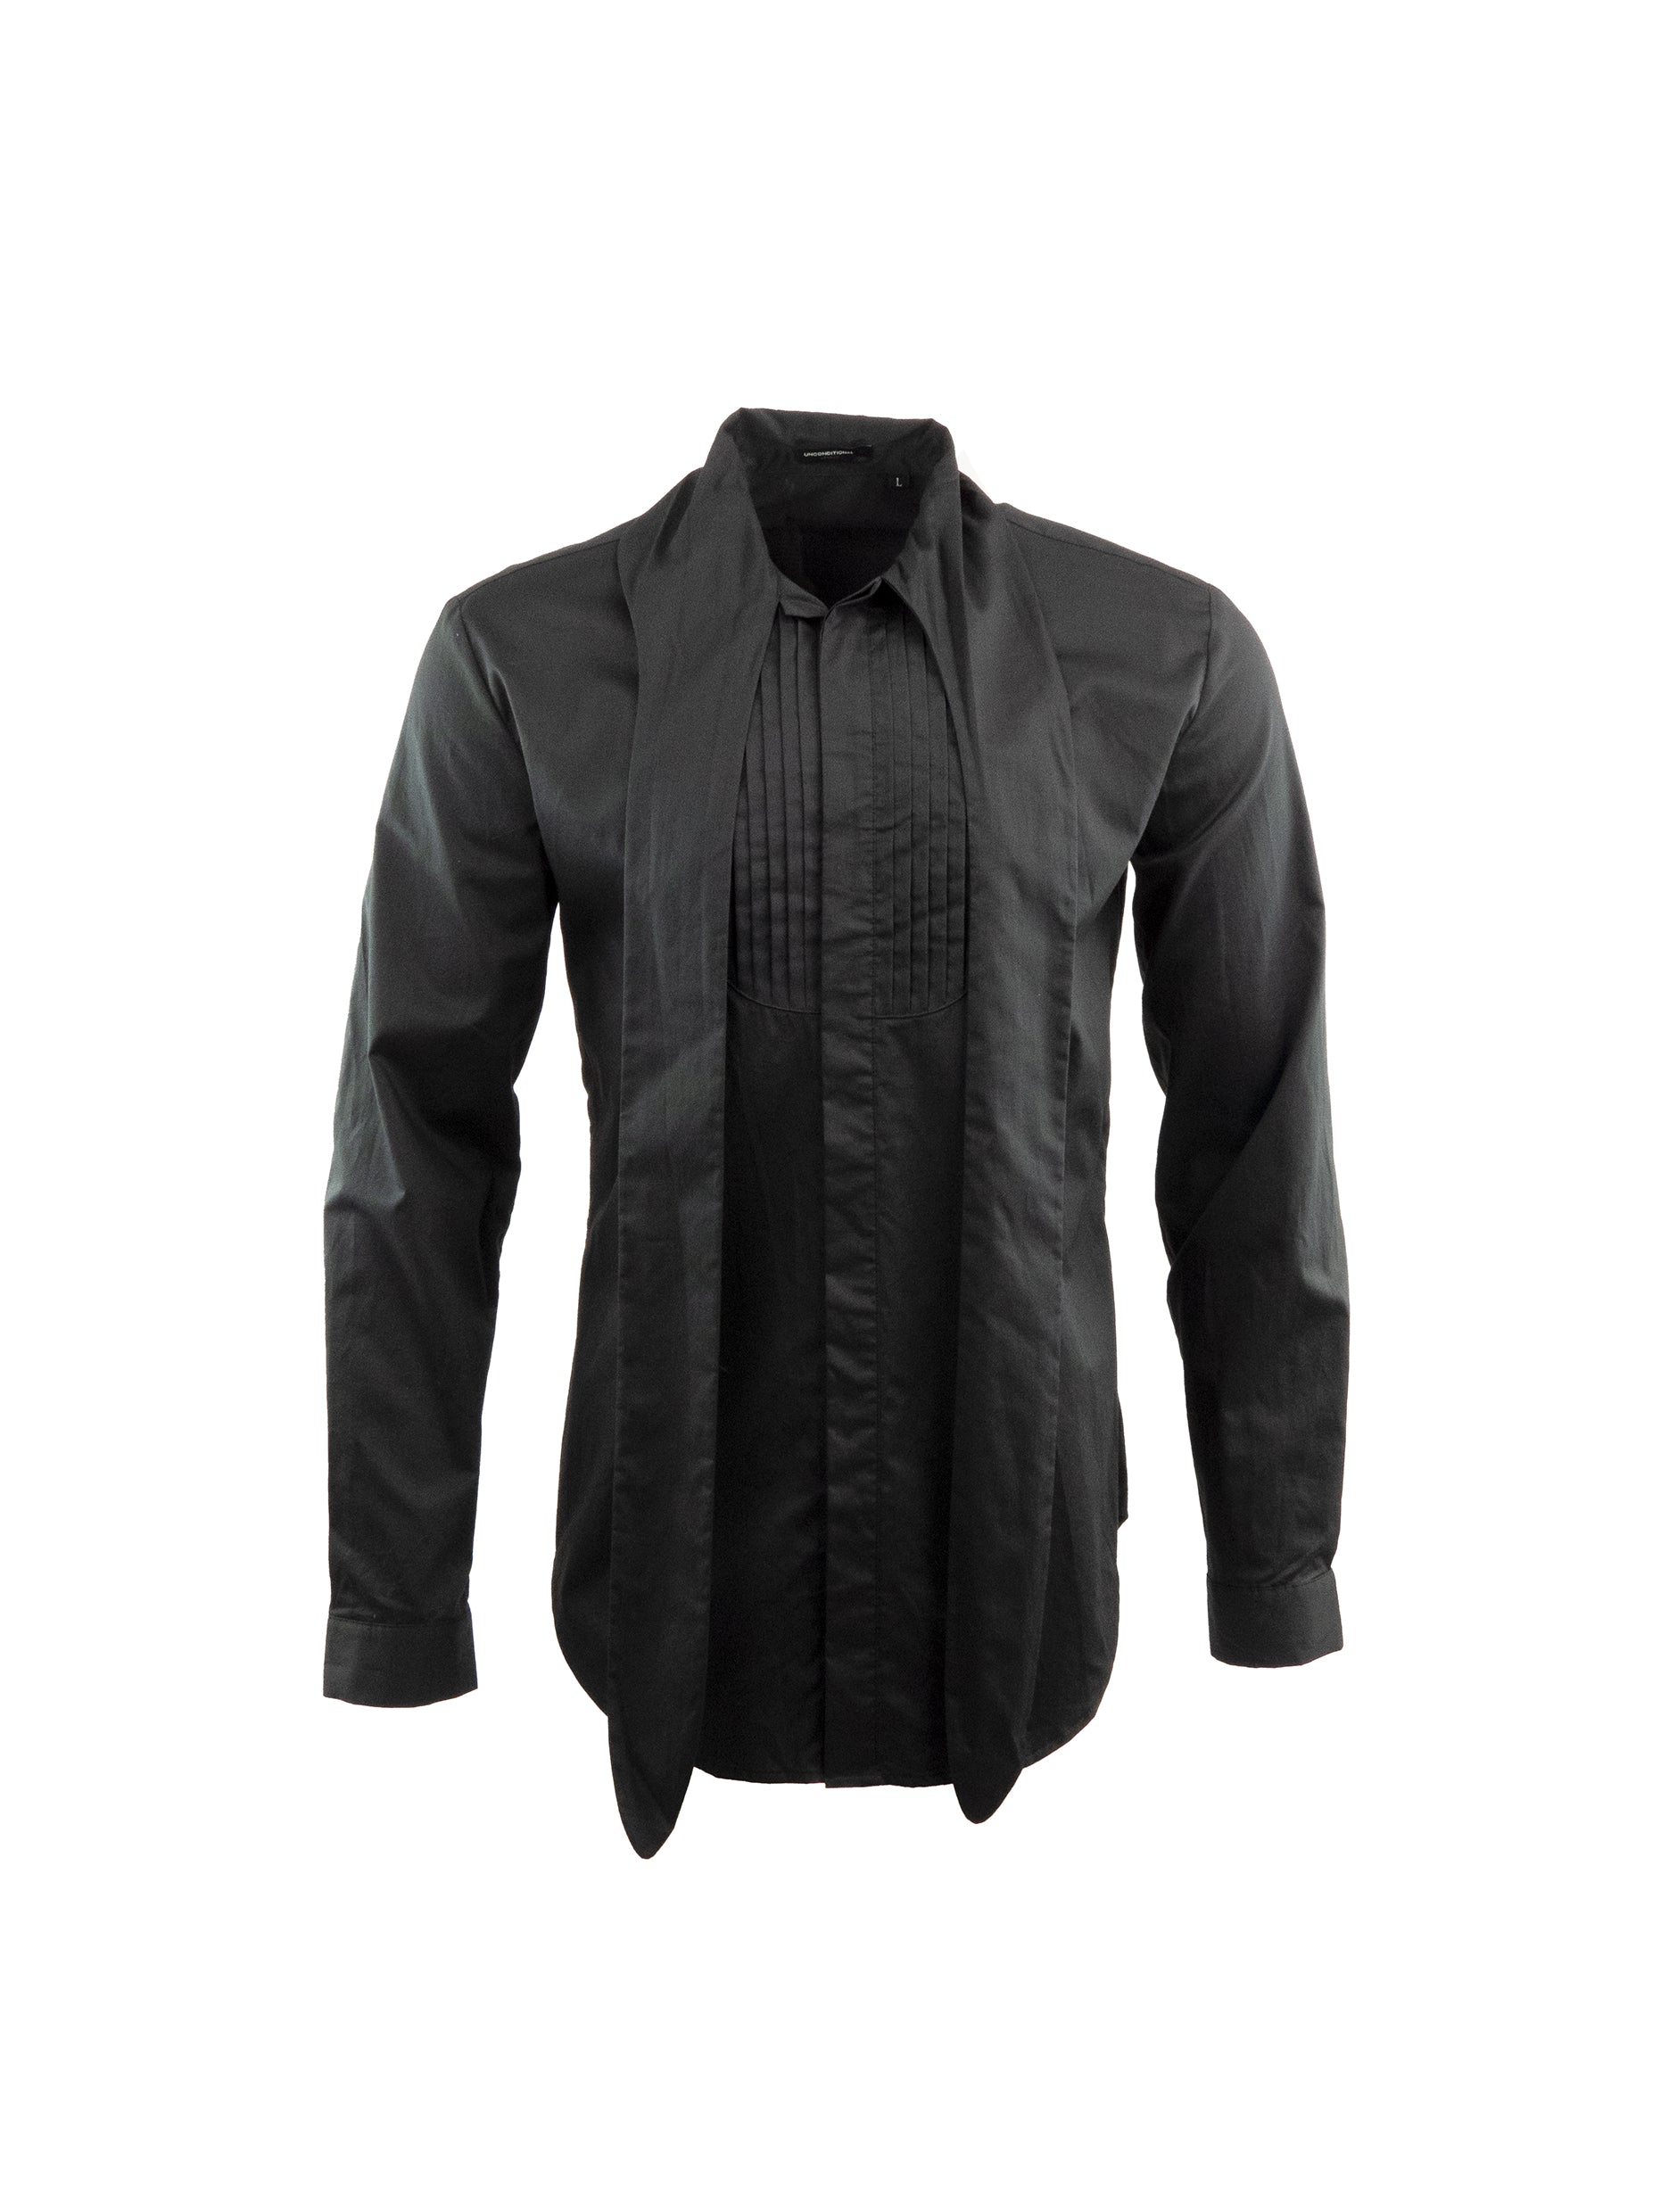 BLACK LONG SLEEVED PATTERNED NECK TIE COTTON SHIRT